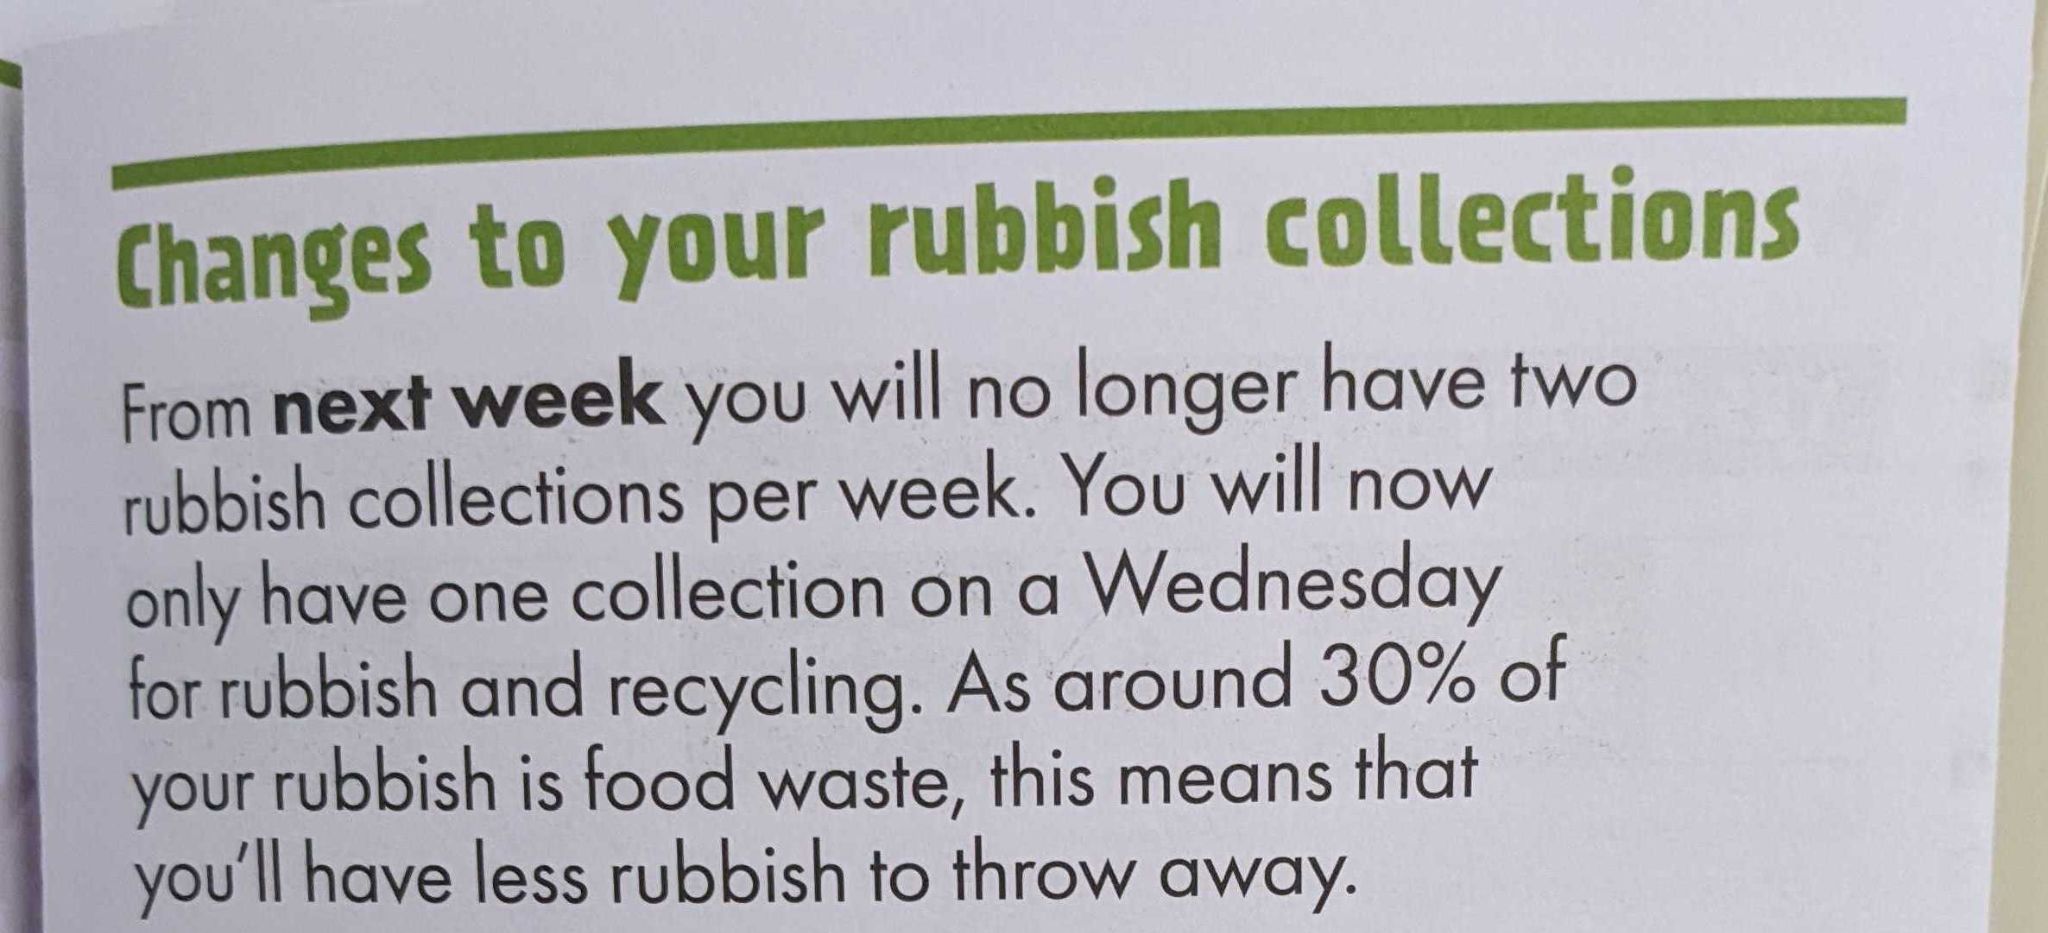 Bin collections cut to once a week in Westminster, according to 2022 leaflet